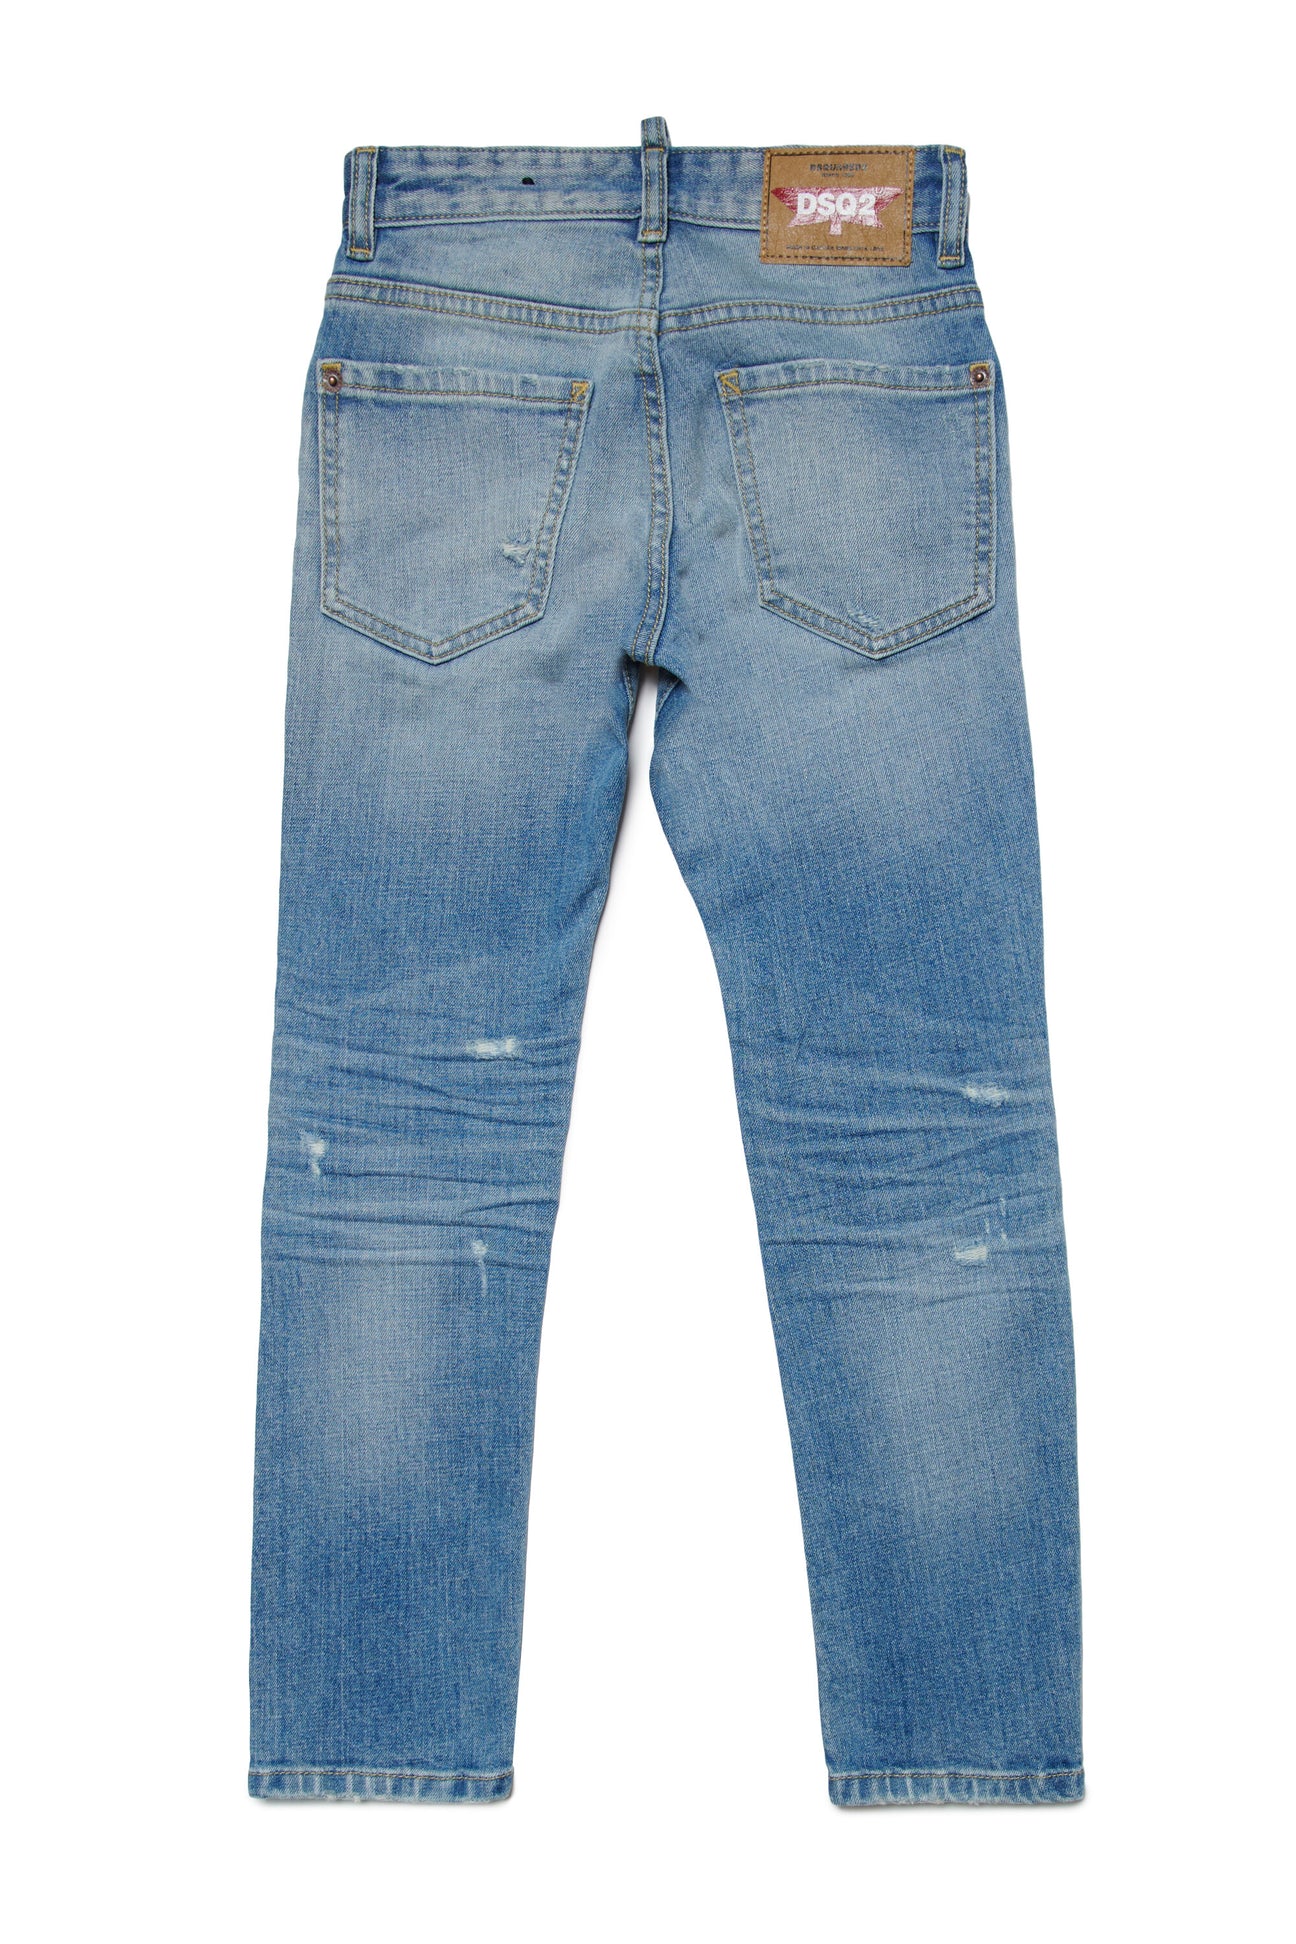 Jeans skinny chiaro con rotture - Cool Guy Jeans skinny chiaro con rotture - Cool Guy